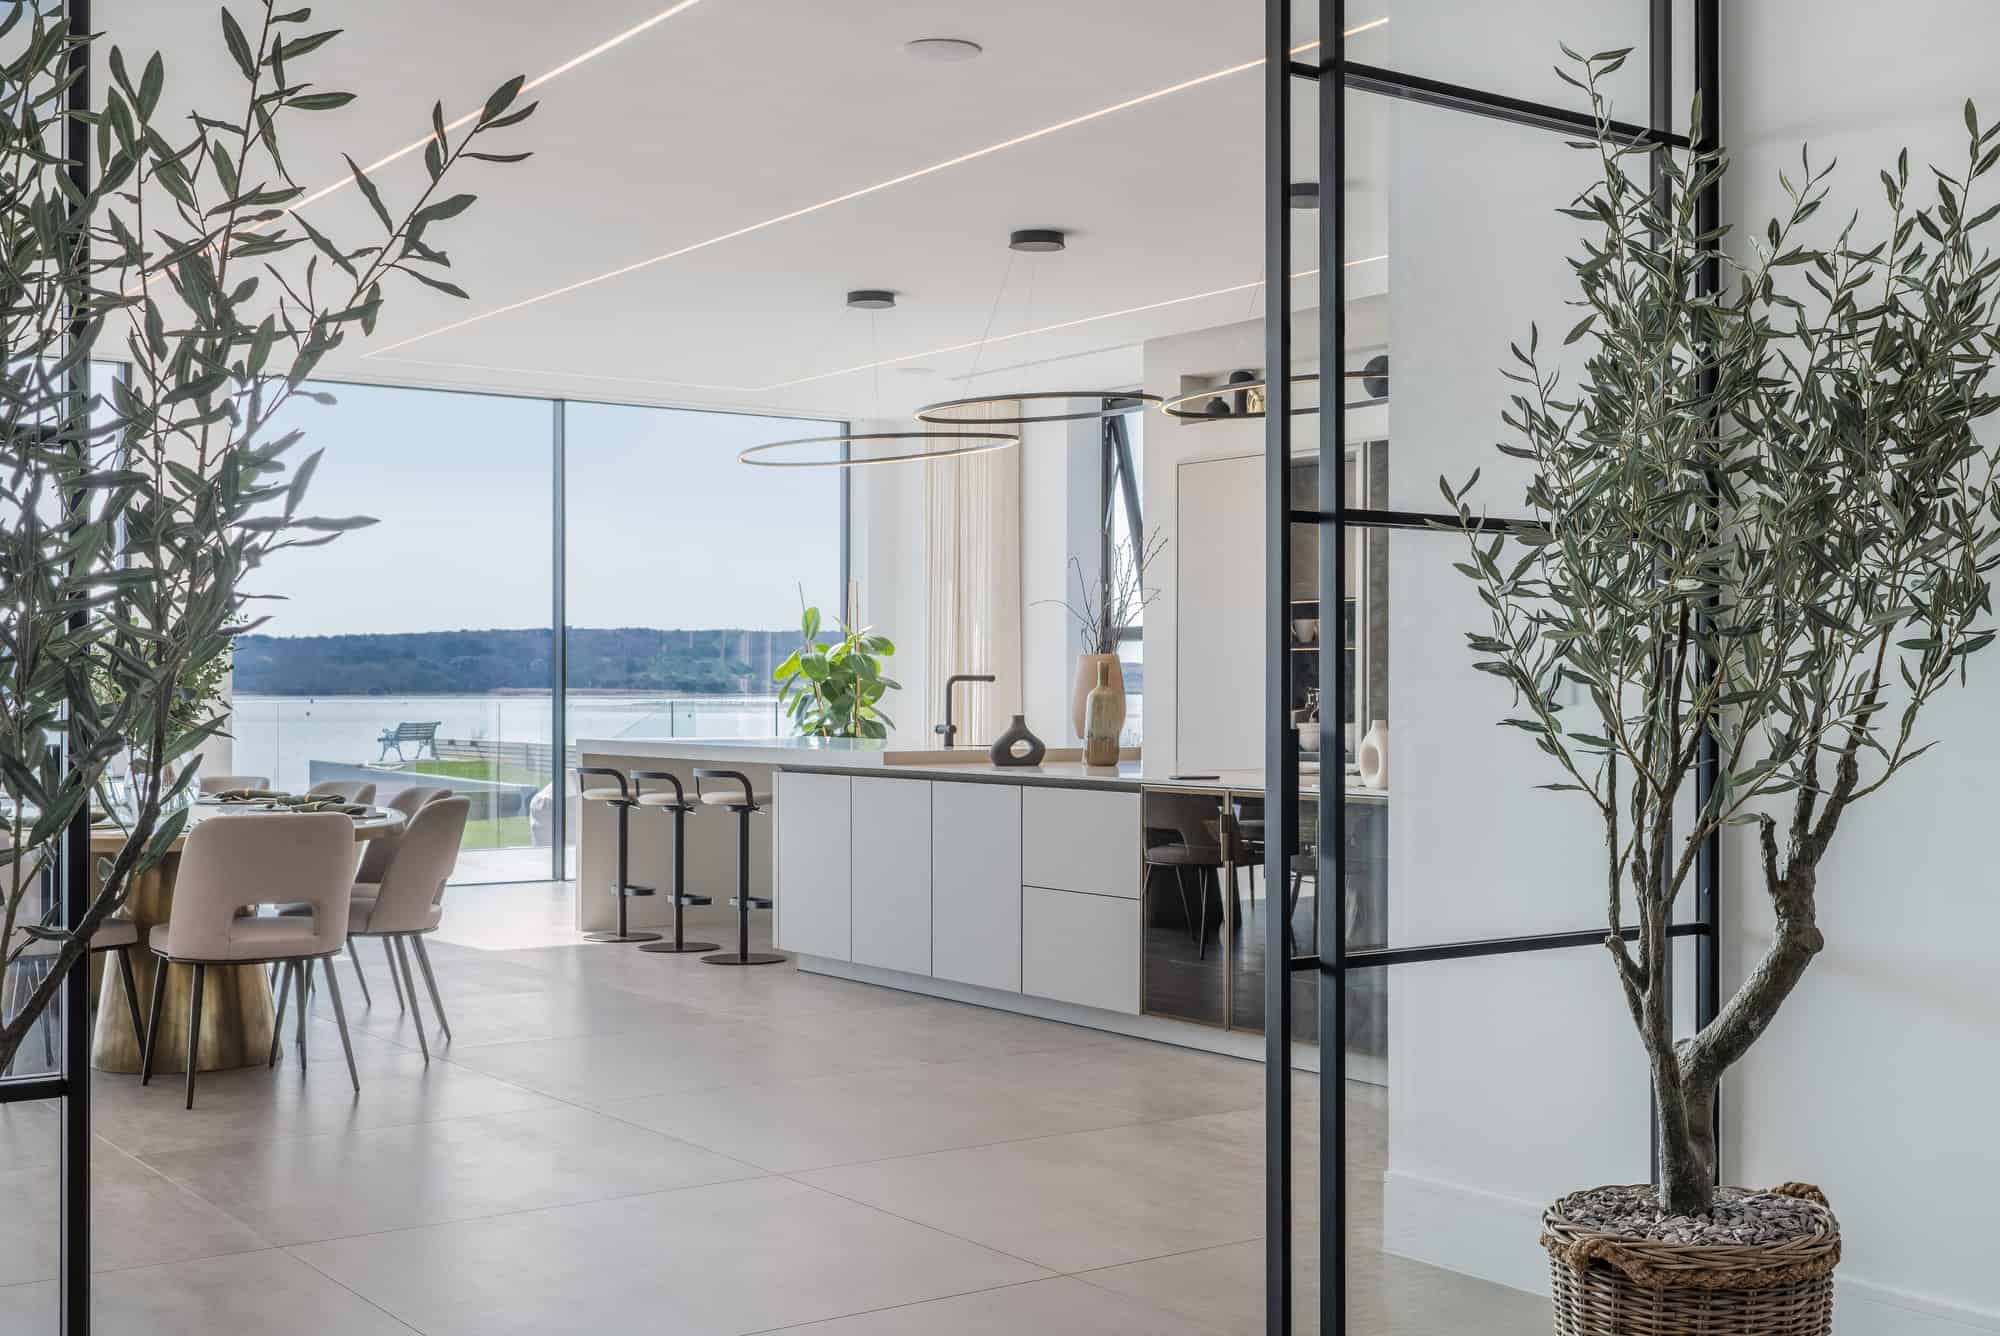 Waterside BH23 - A beautifully designed contemporary home situated on the waterfront at Christchurch Harbour. Available to hire for commercial photography and film - The Location Guys